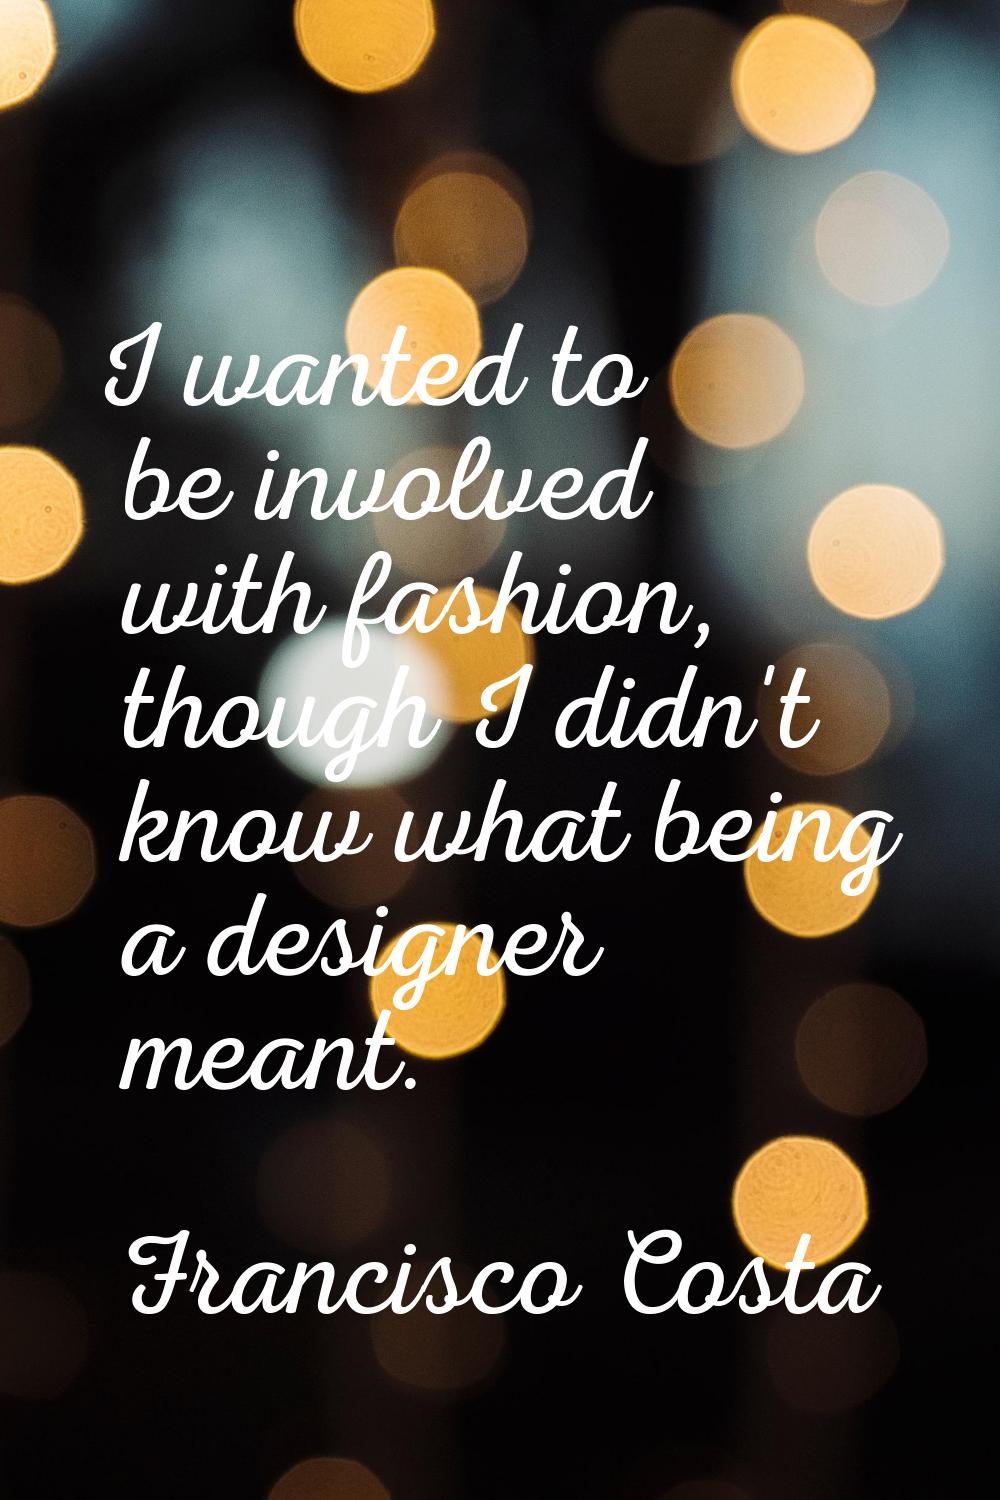 I wanted to be involved with fashion, though I didn't know what being a designer meant.